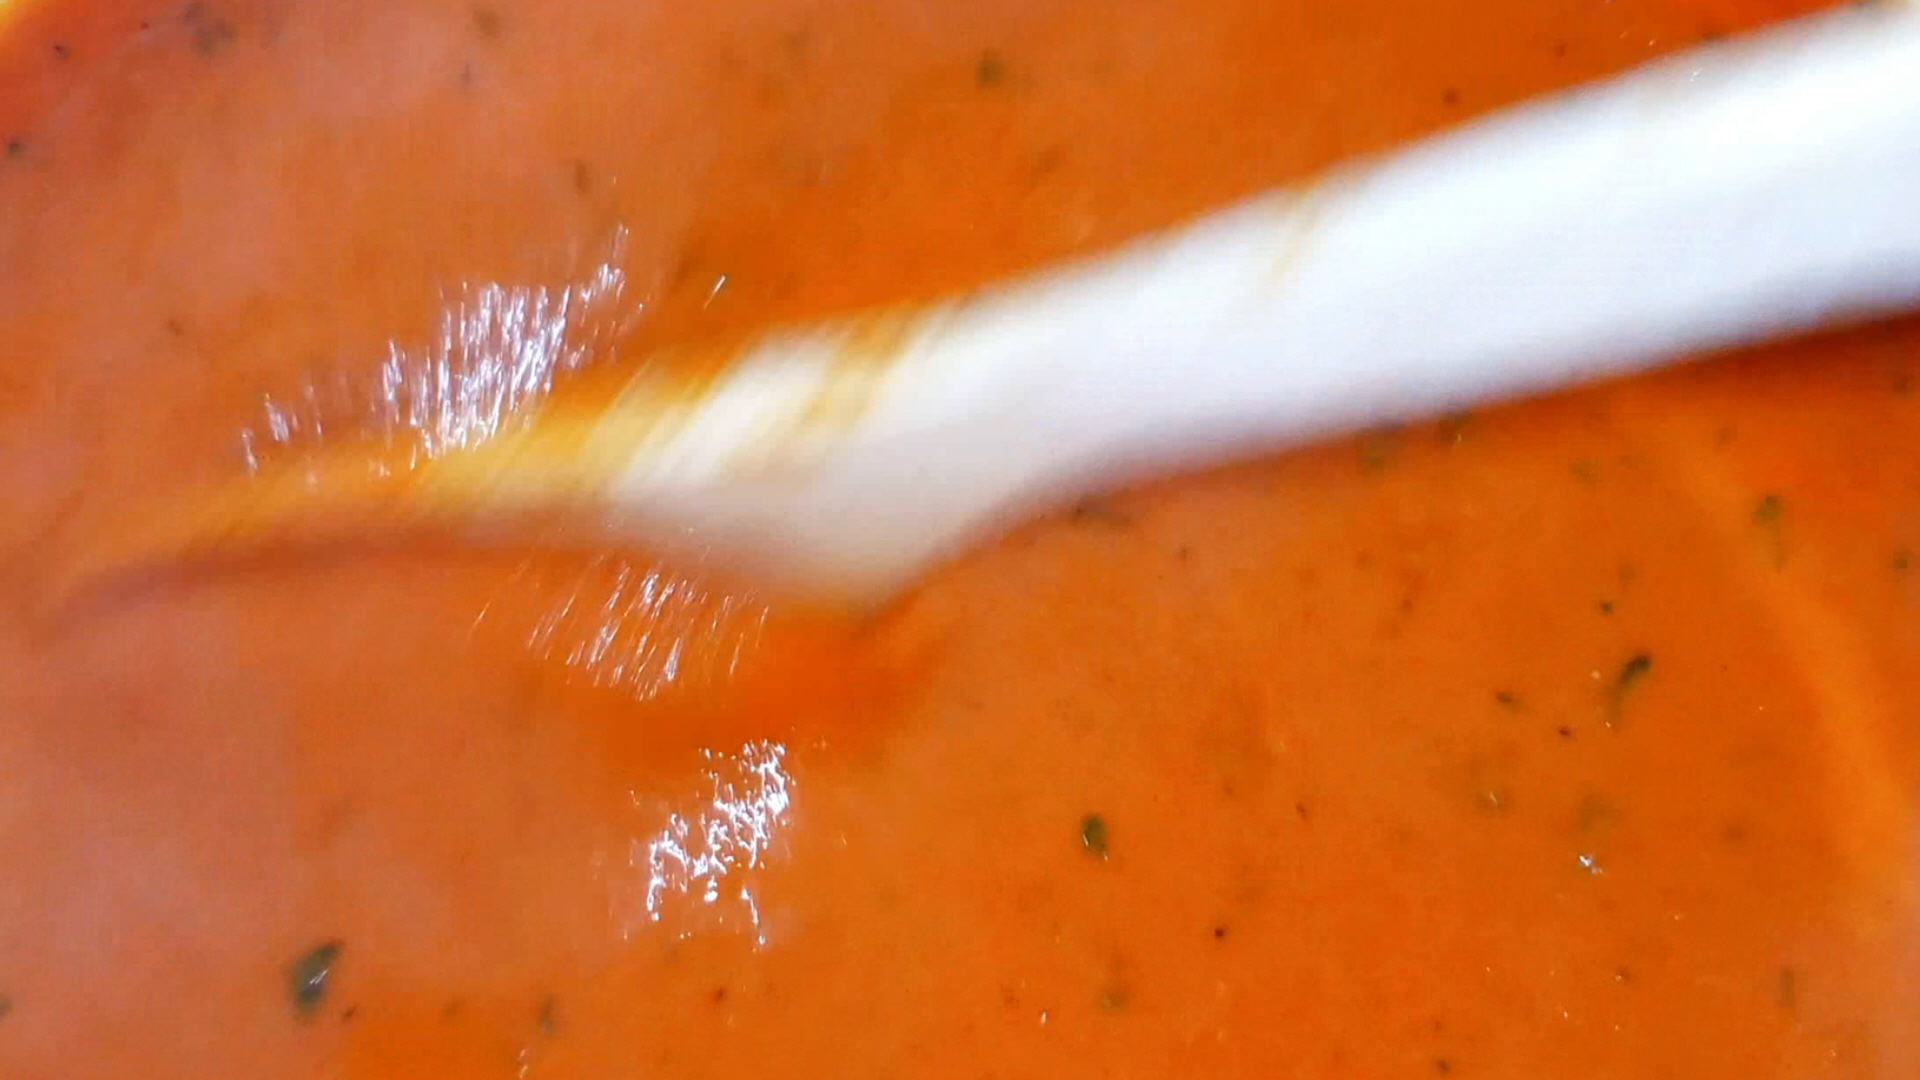 Tomato Soup cooking for the finish